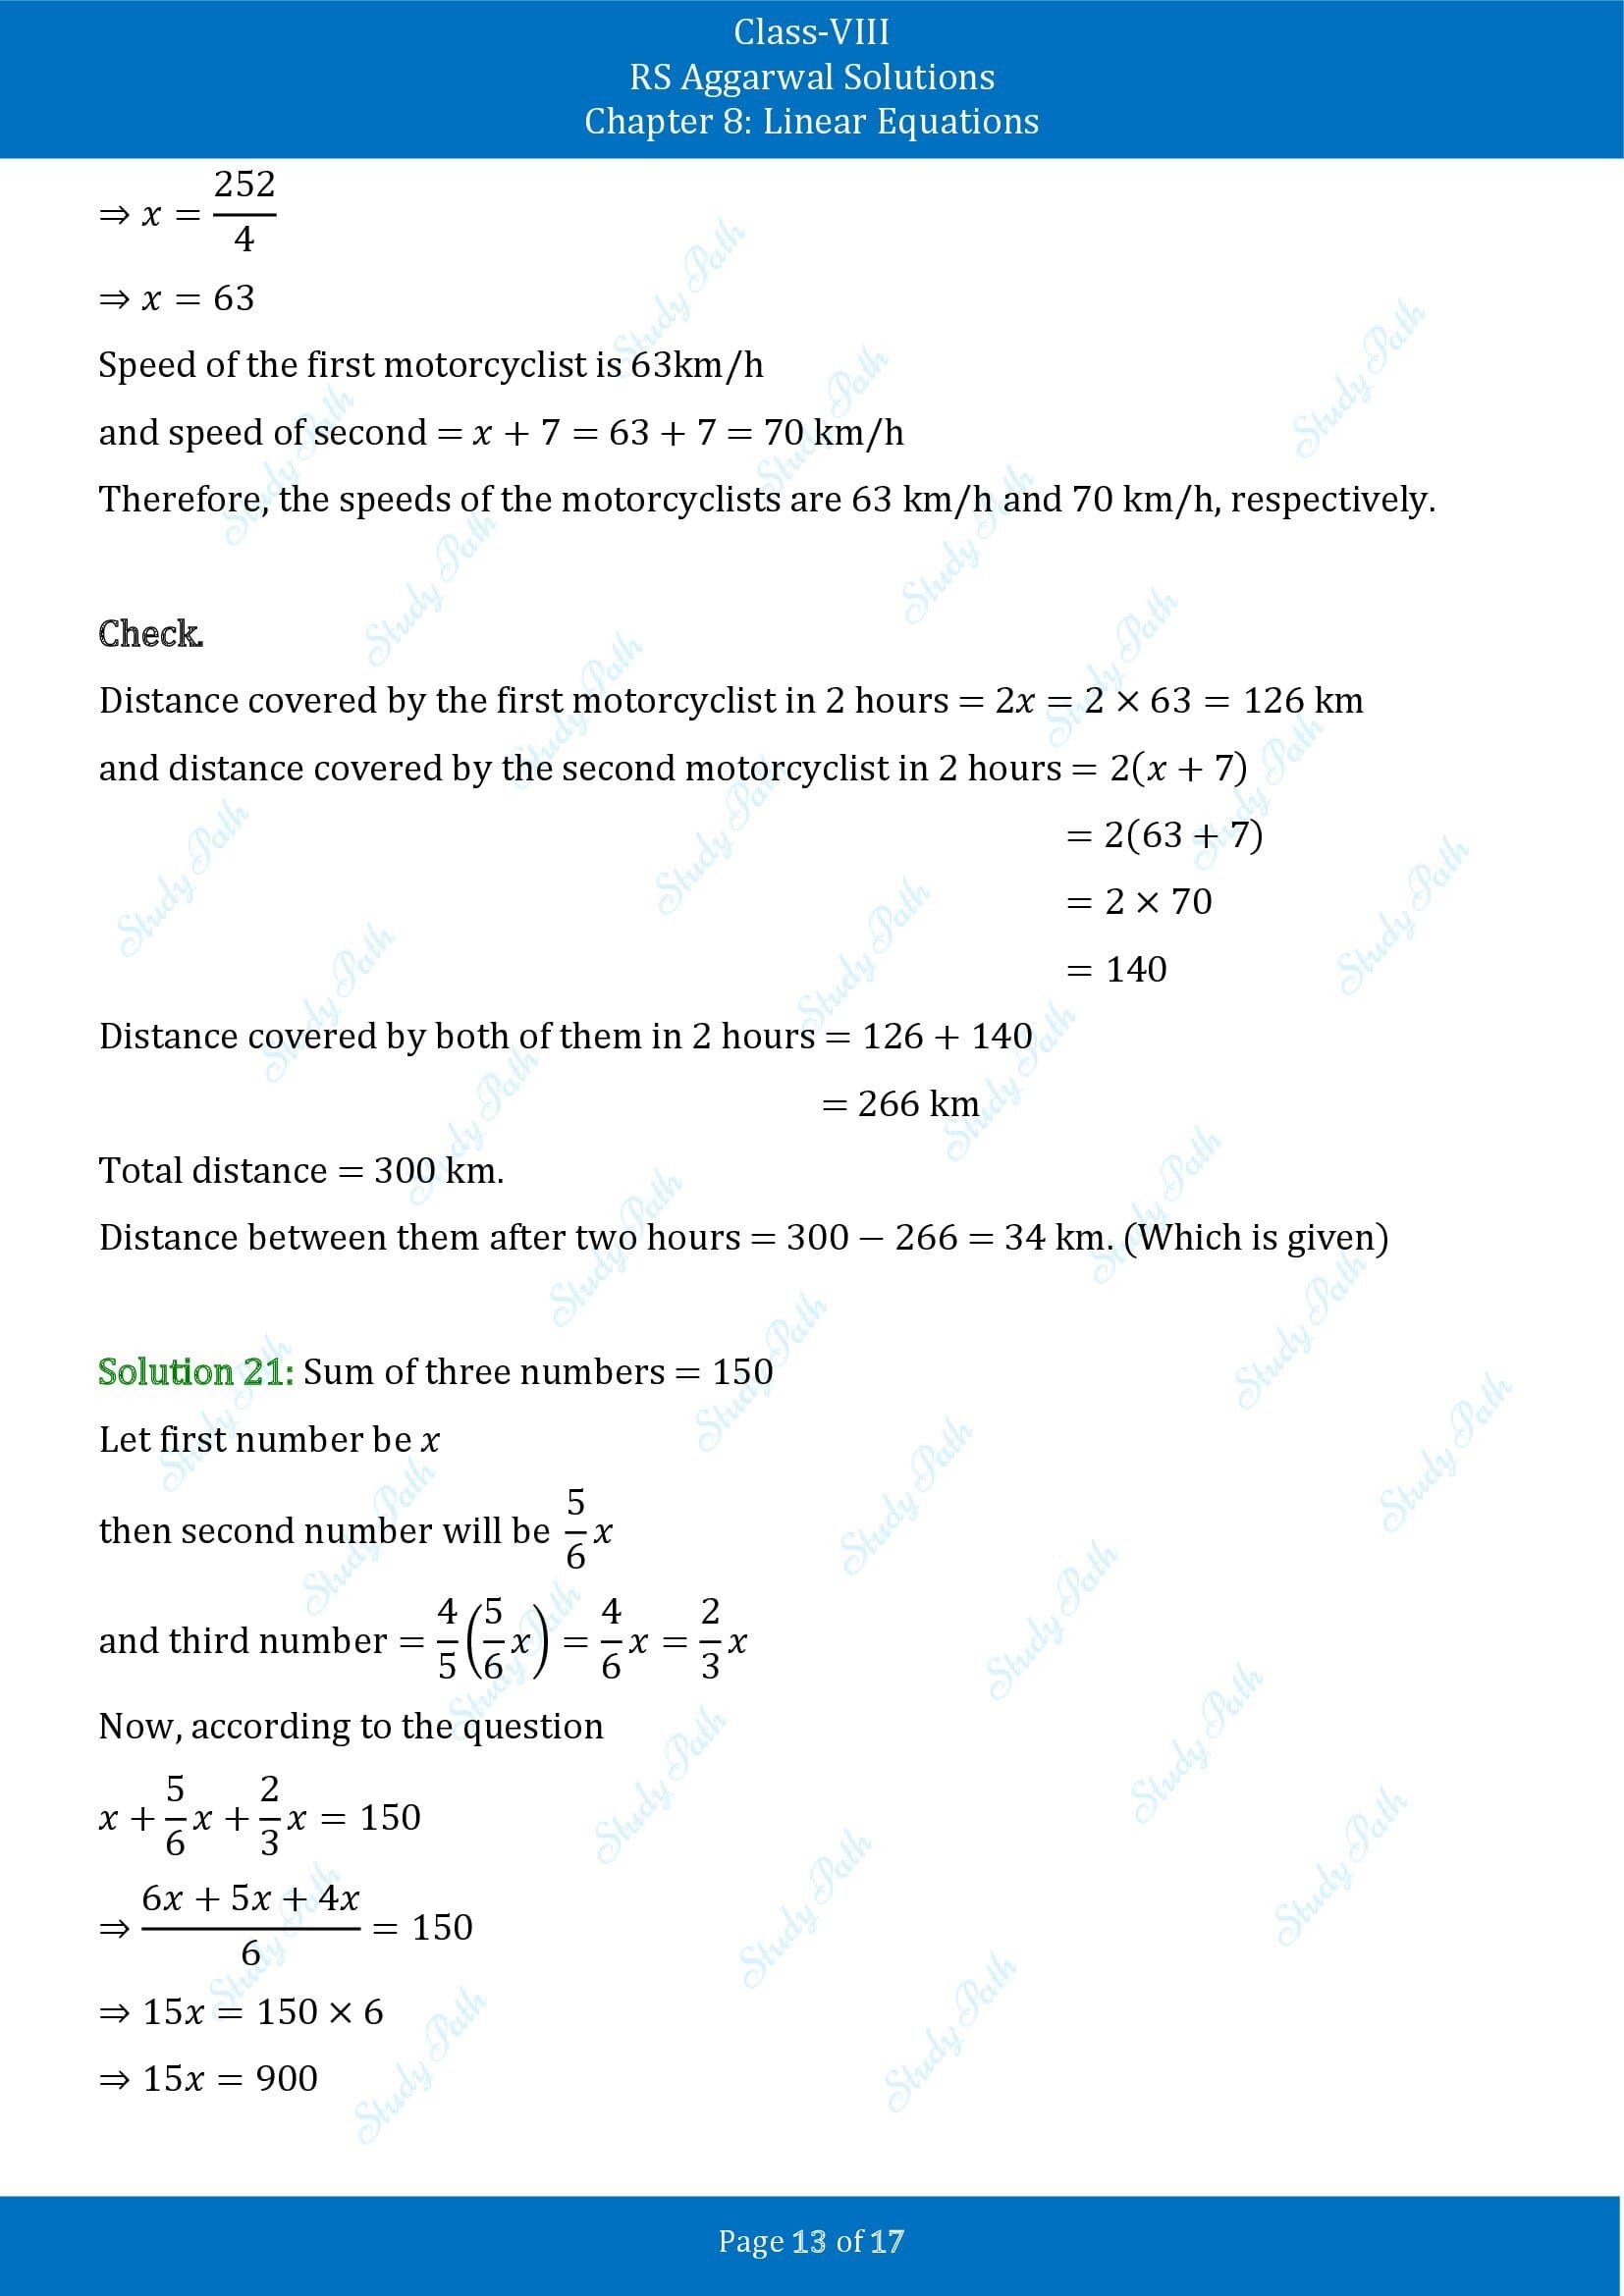 RS Aggarwal Solutions Class 8 Chapter 8 Linear Equations Exercise 8B 00013